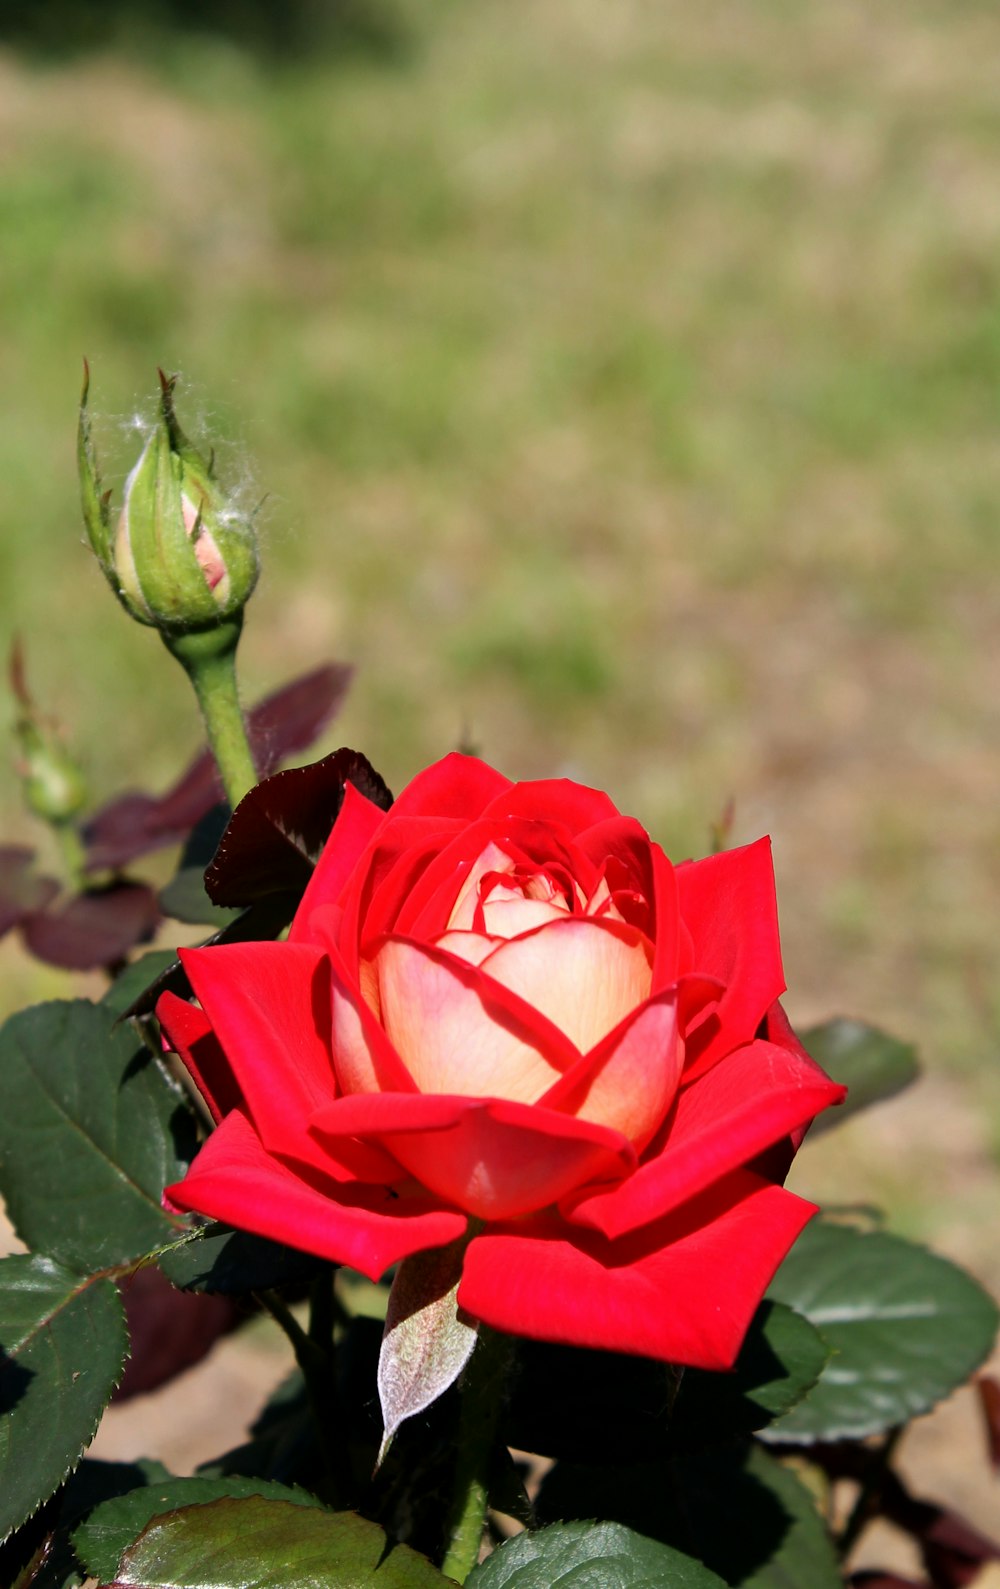 a close up of a red rose in a garden